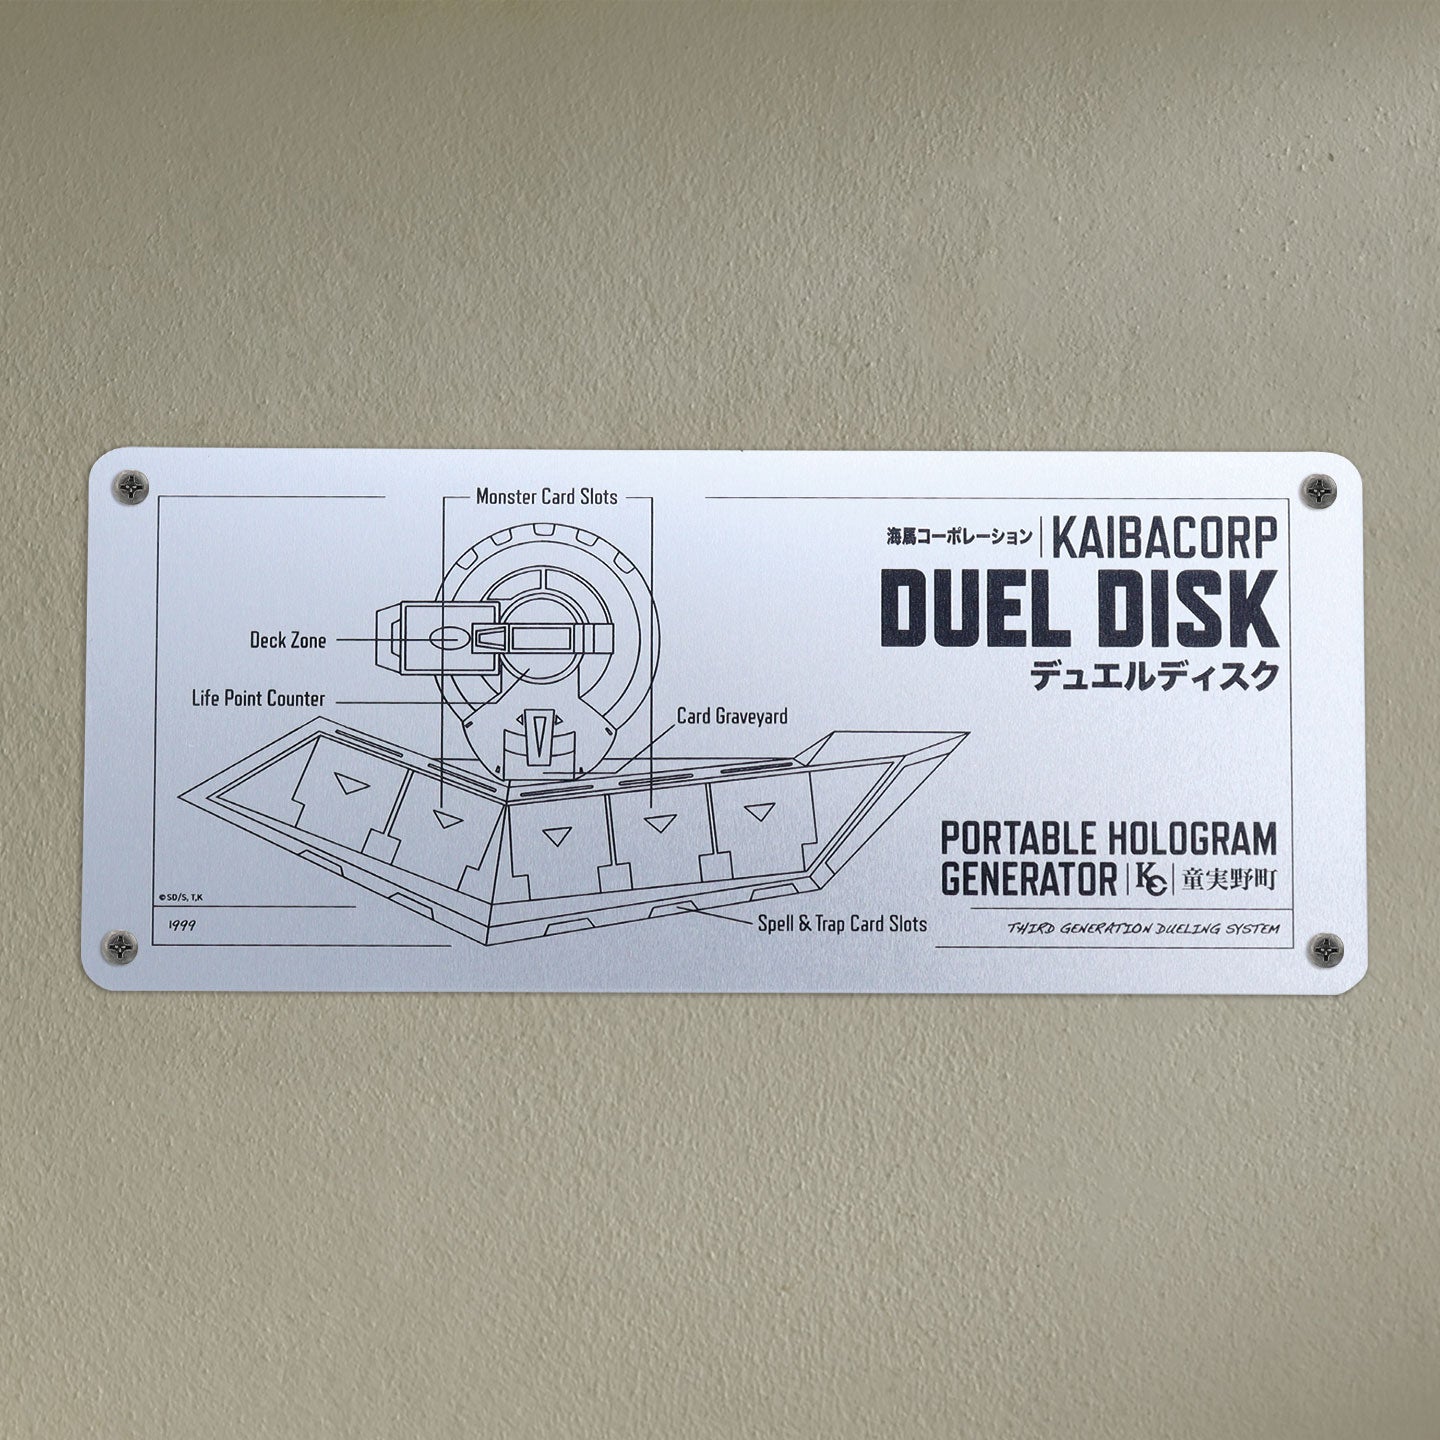 Yu-Gi-Oh! Limited Edition Duel Disk Schematic Fan-Plate